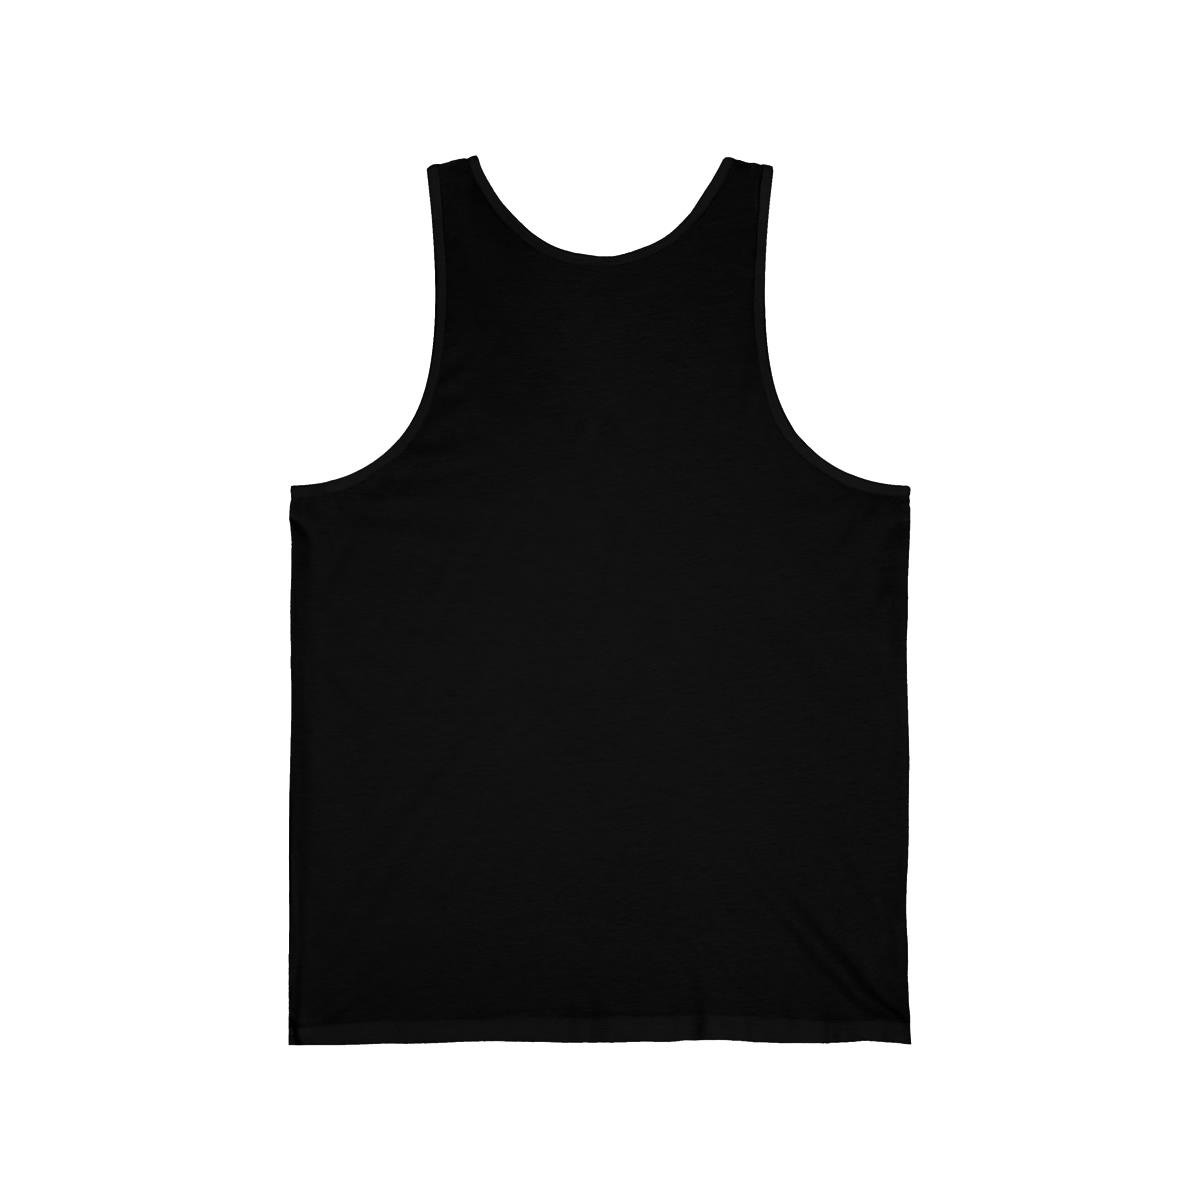 Fear Not For the Wounded Heart Unisex Jersey Tank